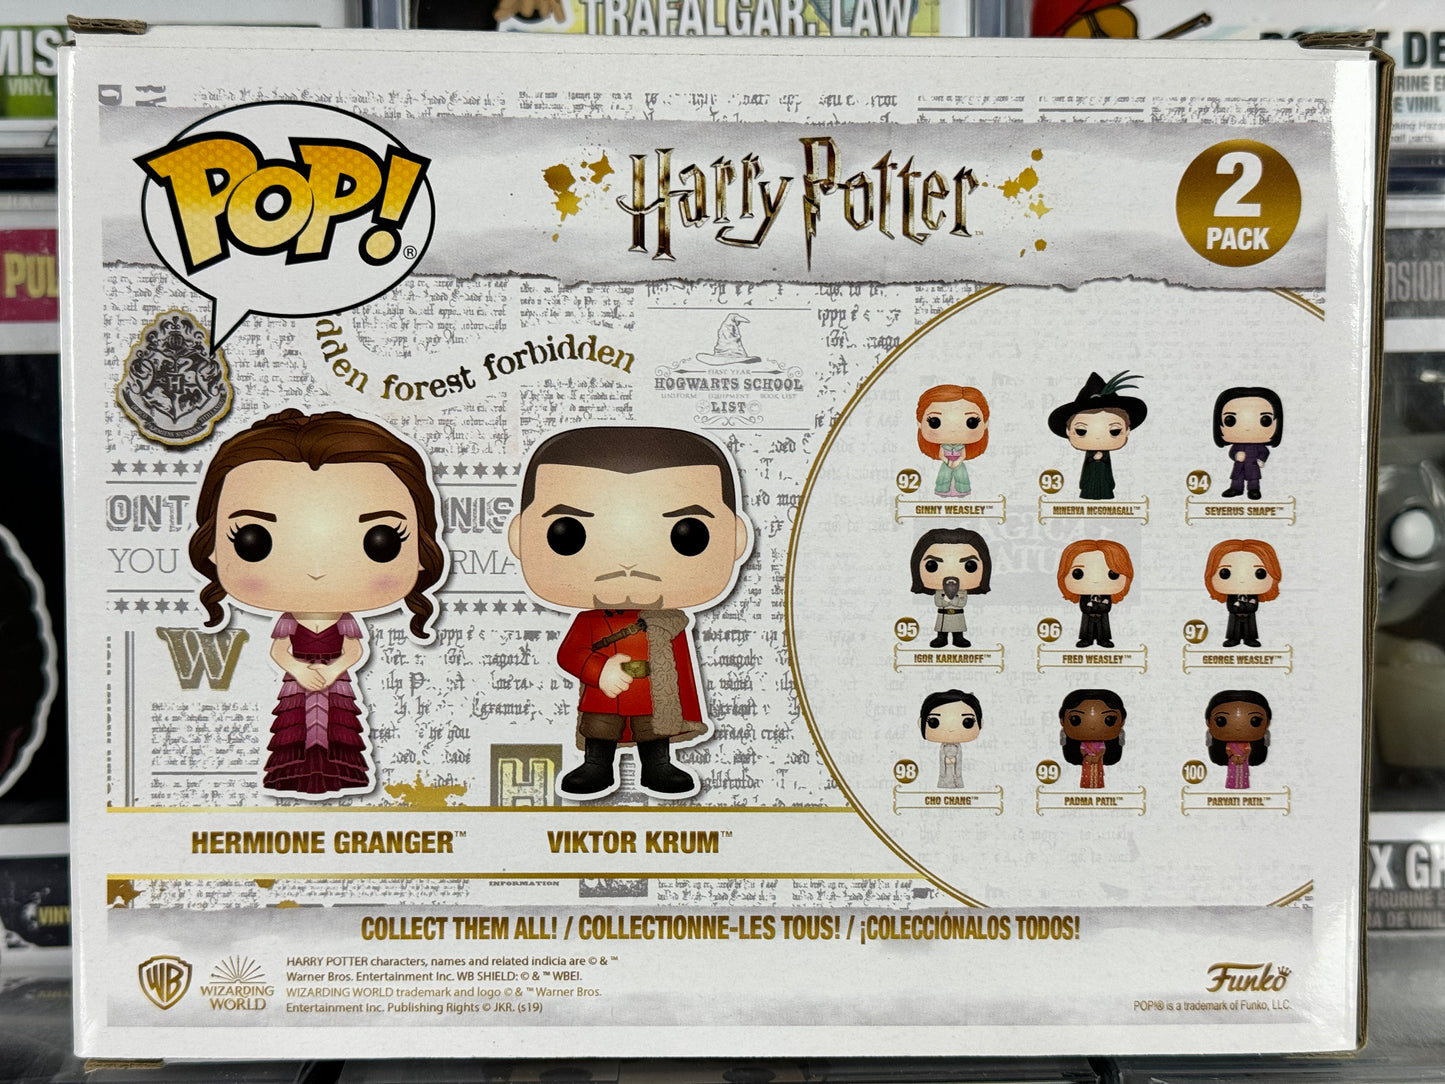 Wizarding World of Harry Potter - Hermione Granger & Victor Krum (Yule Ball) (2-Pack) Vaulted